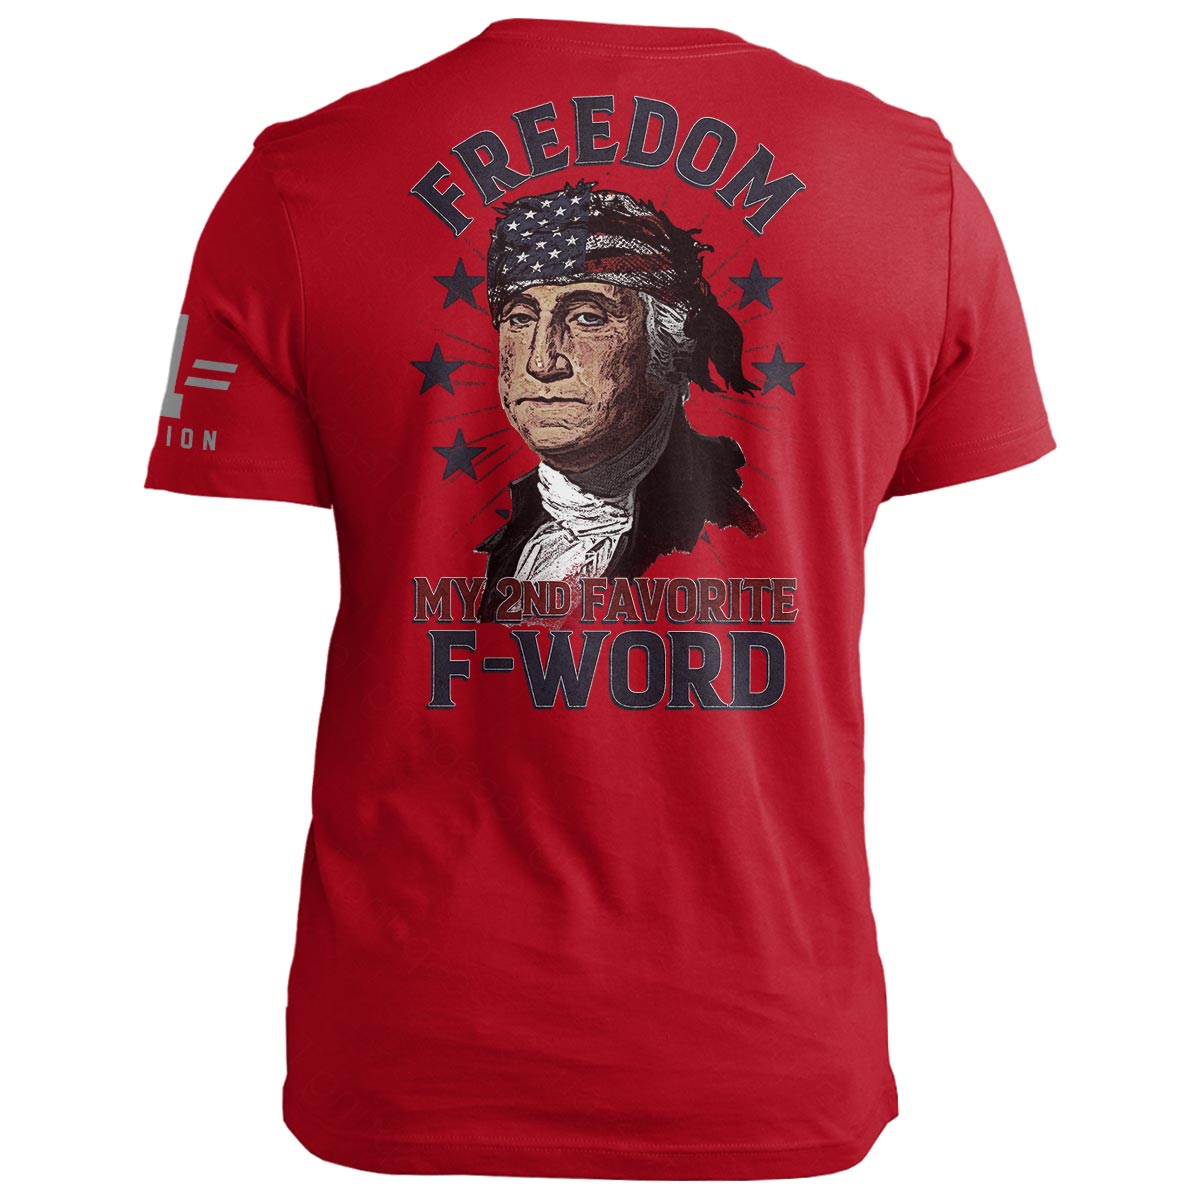 Freedom...my 2nd Favorite F-Word